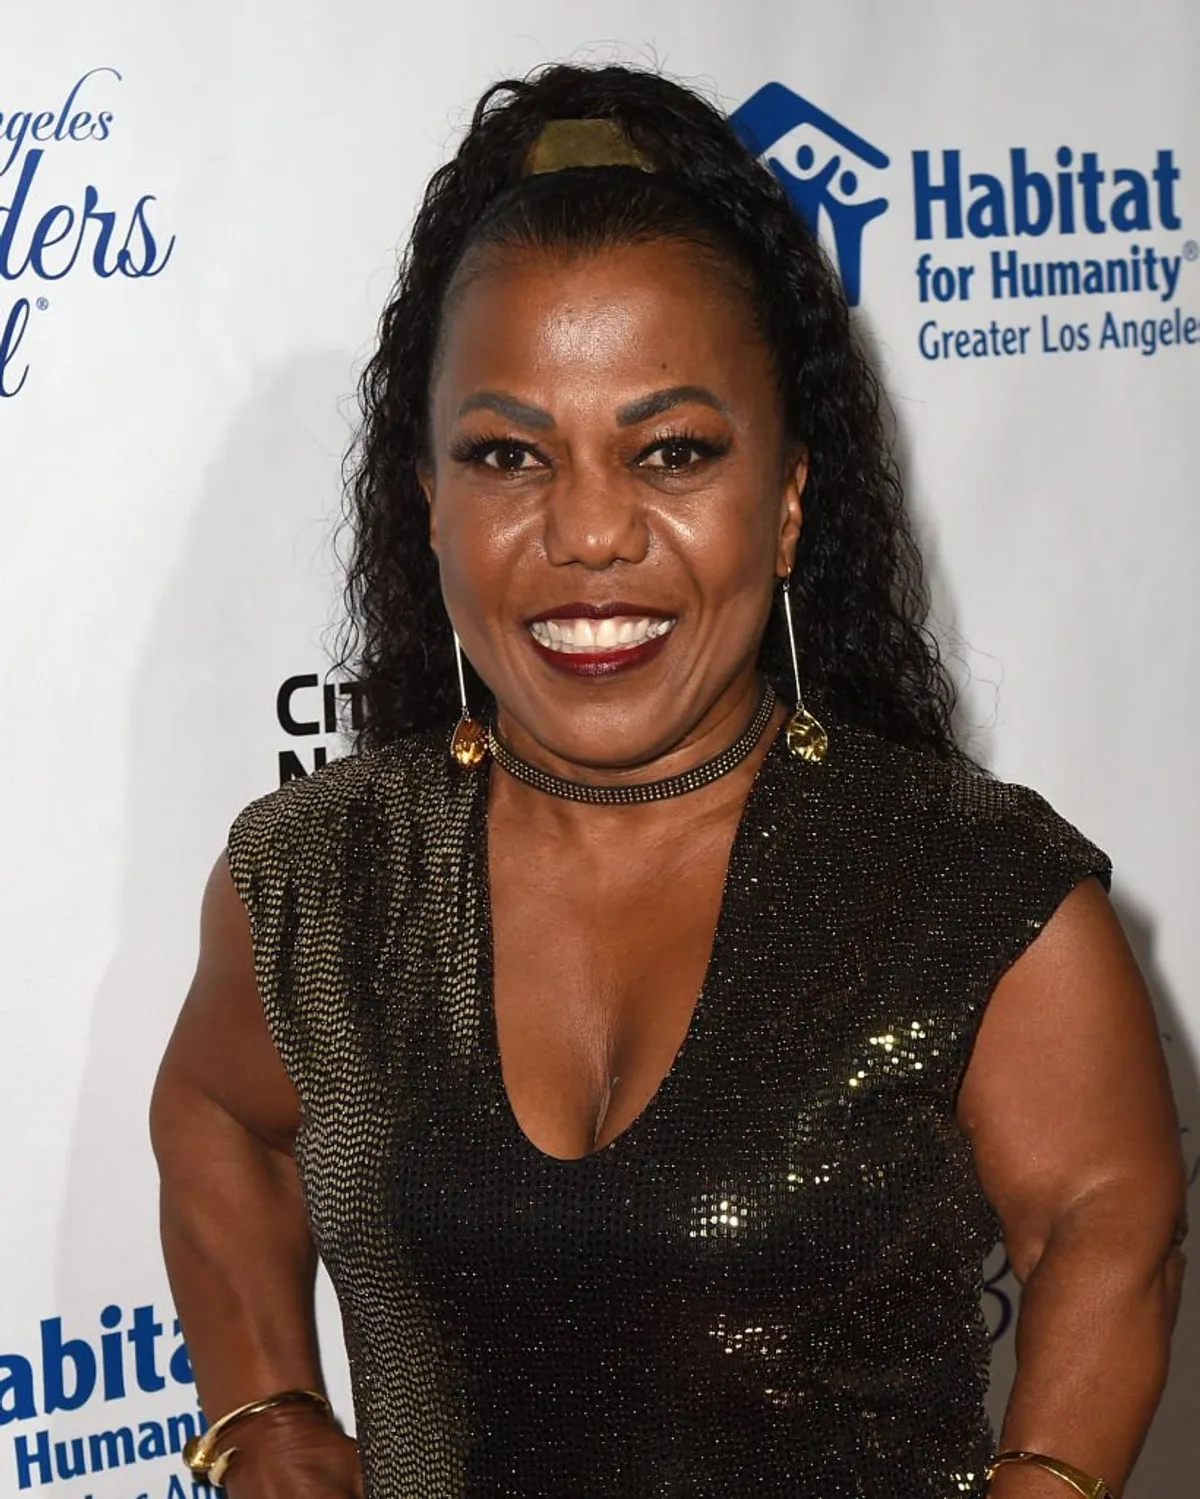 Tonya Banks on September 26, 2019 in Beverly Hills, California | Source: Getty Images